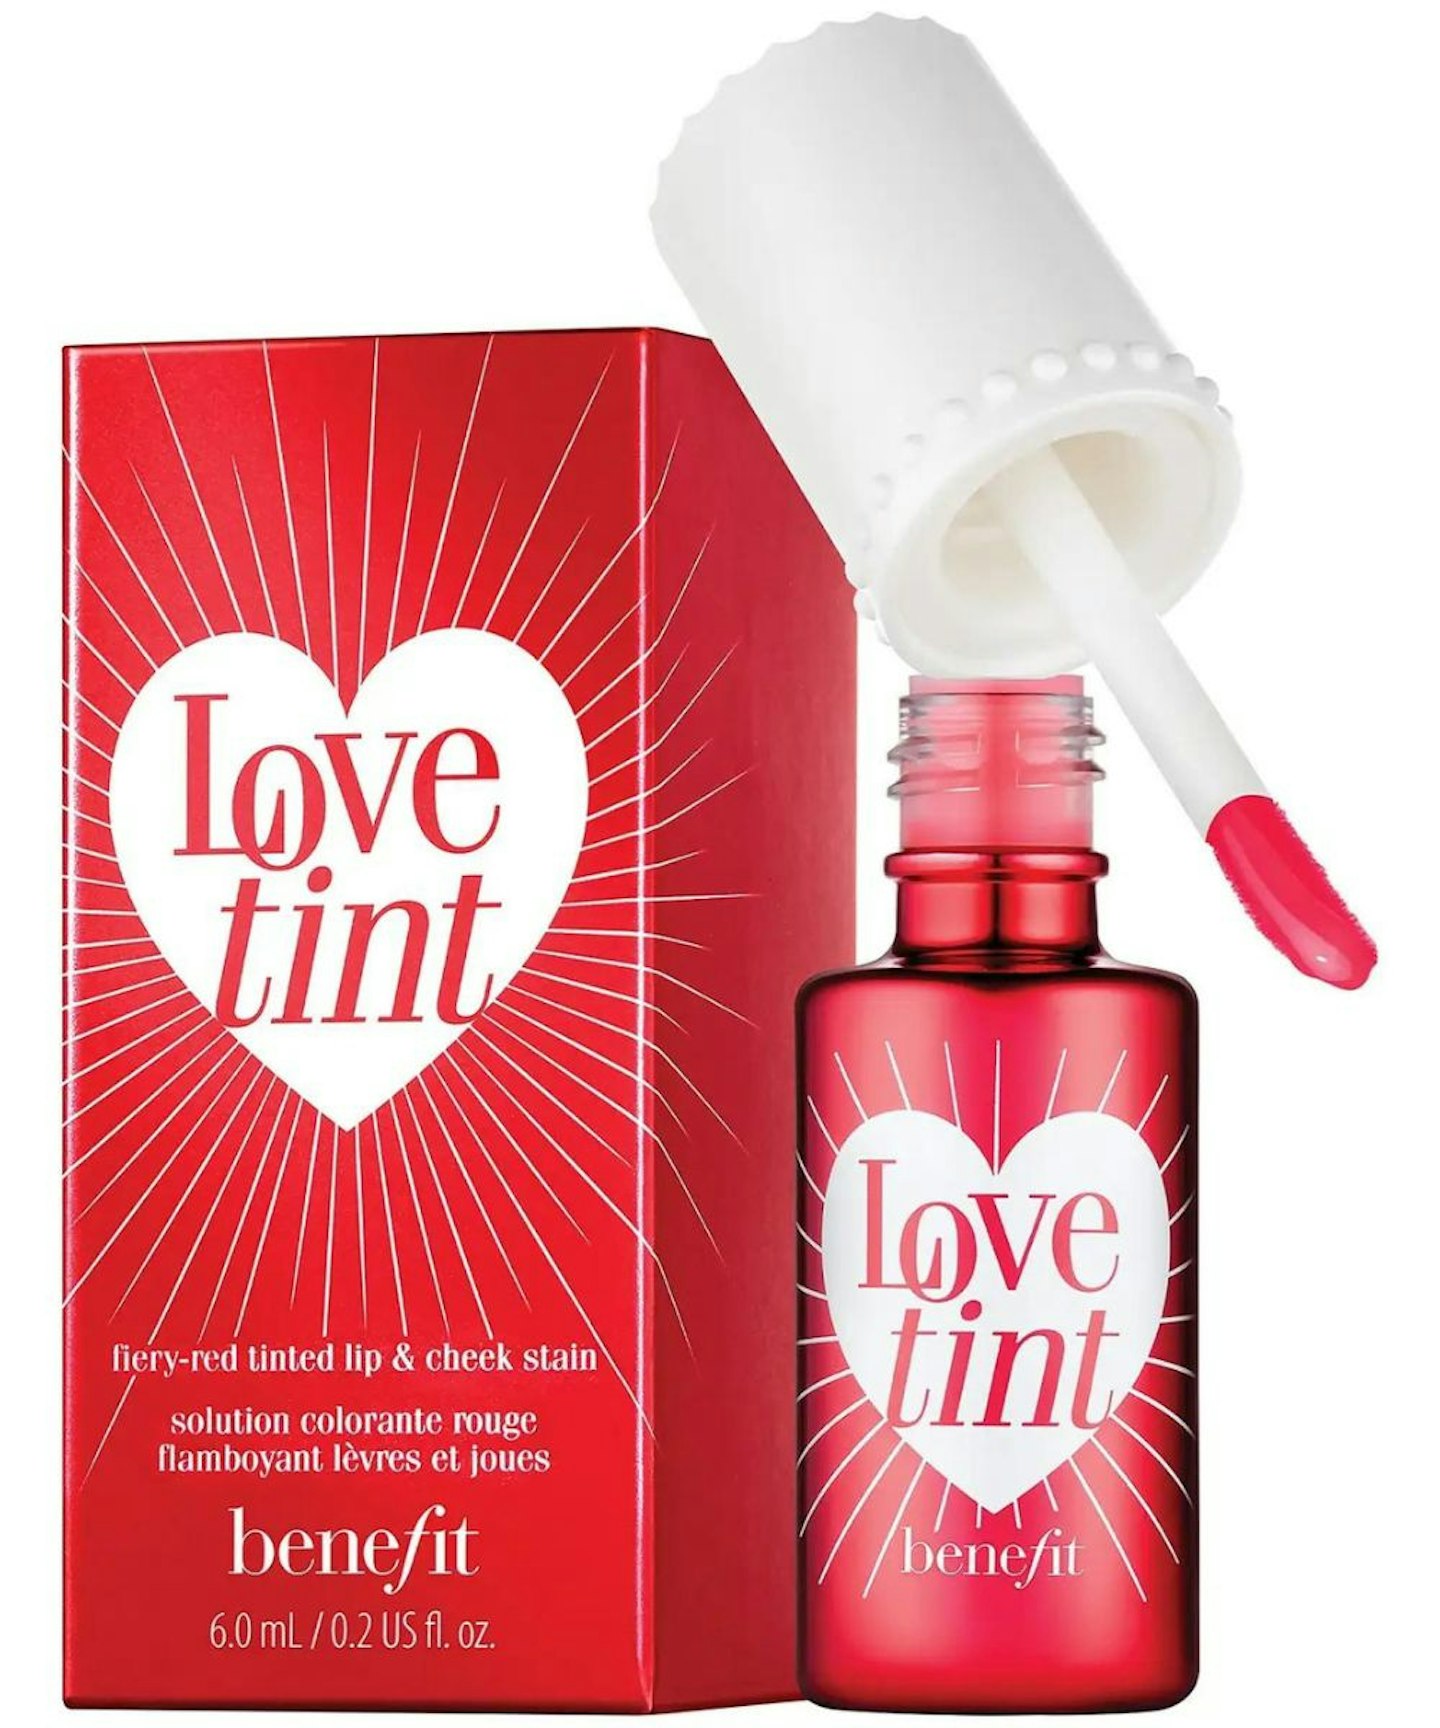 Benefit Love Tint Fiery Red Tinted Lip and Cheek Stain 6ml